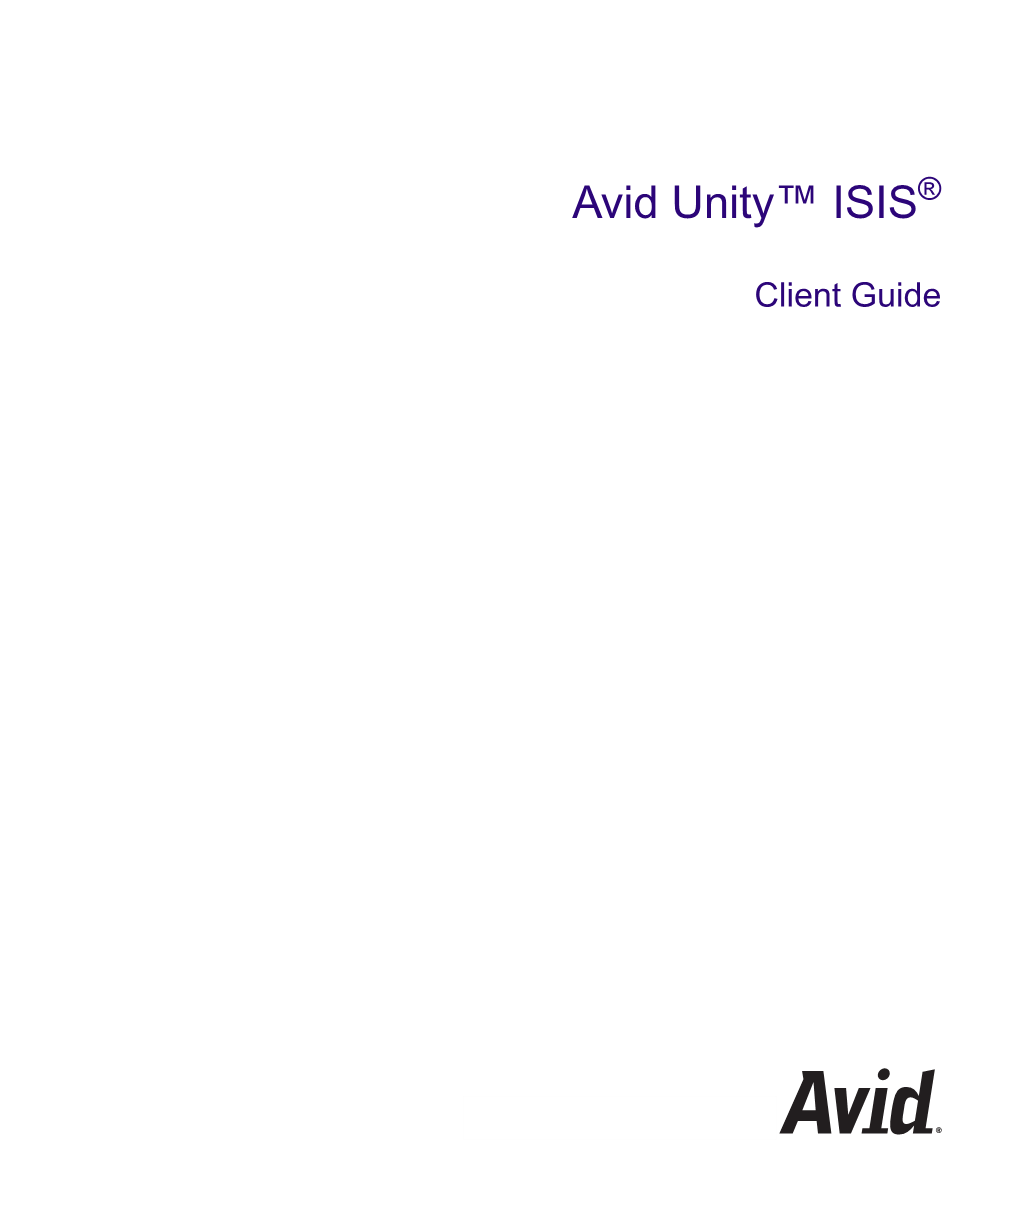 Avid Unity ISIS Client User's Guide